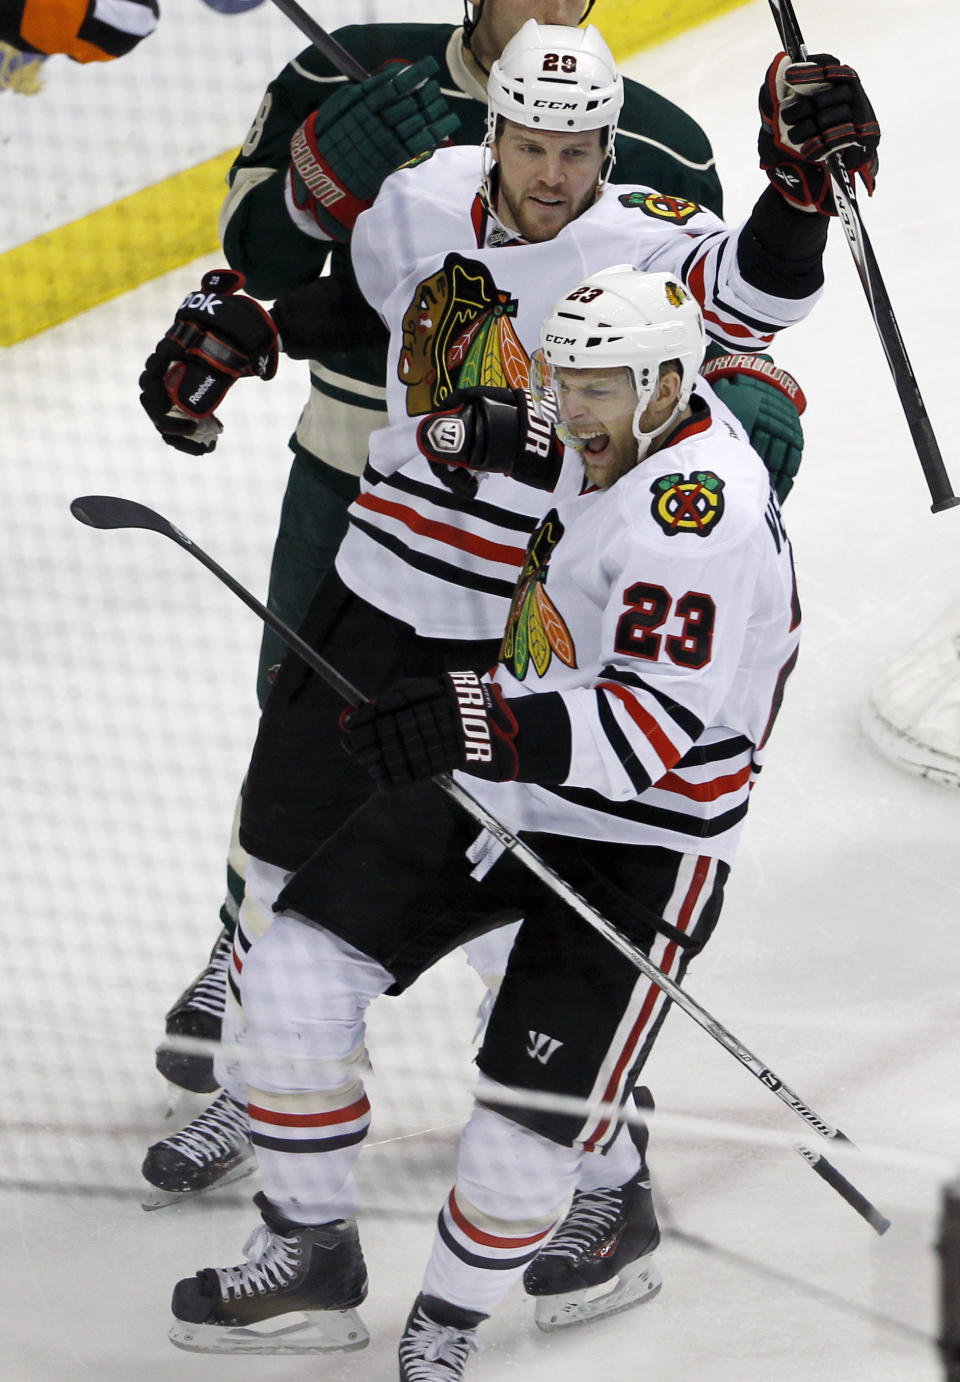 Chicago Blackhawks right wing Kris Versteeg (23) reacts in front of Blackhawks left wing Brandon Saad (20) after scoring on Minnesota Wild goalie Ilya Bryzgalov during the first period of Game 6 of an NHL hockey second-round playoff series in St. Paul, Minn., Tuesday, May 13, 2014. (AP Photo/Ann Heisenfelt)